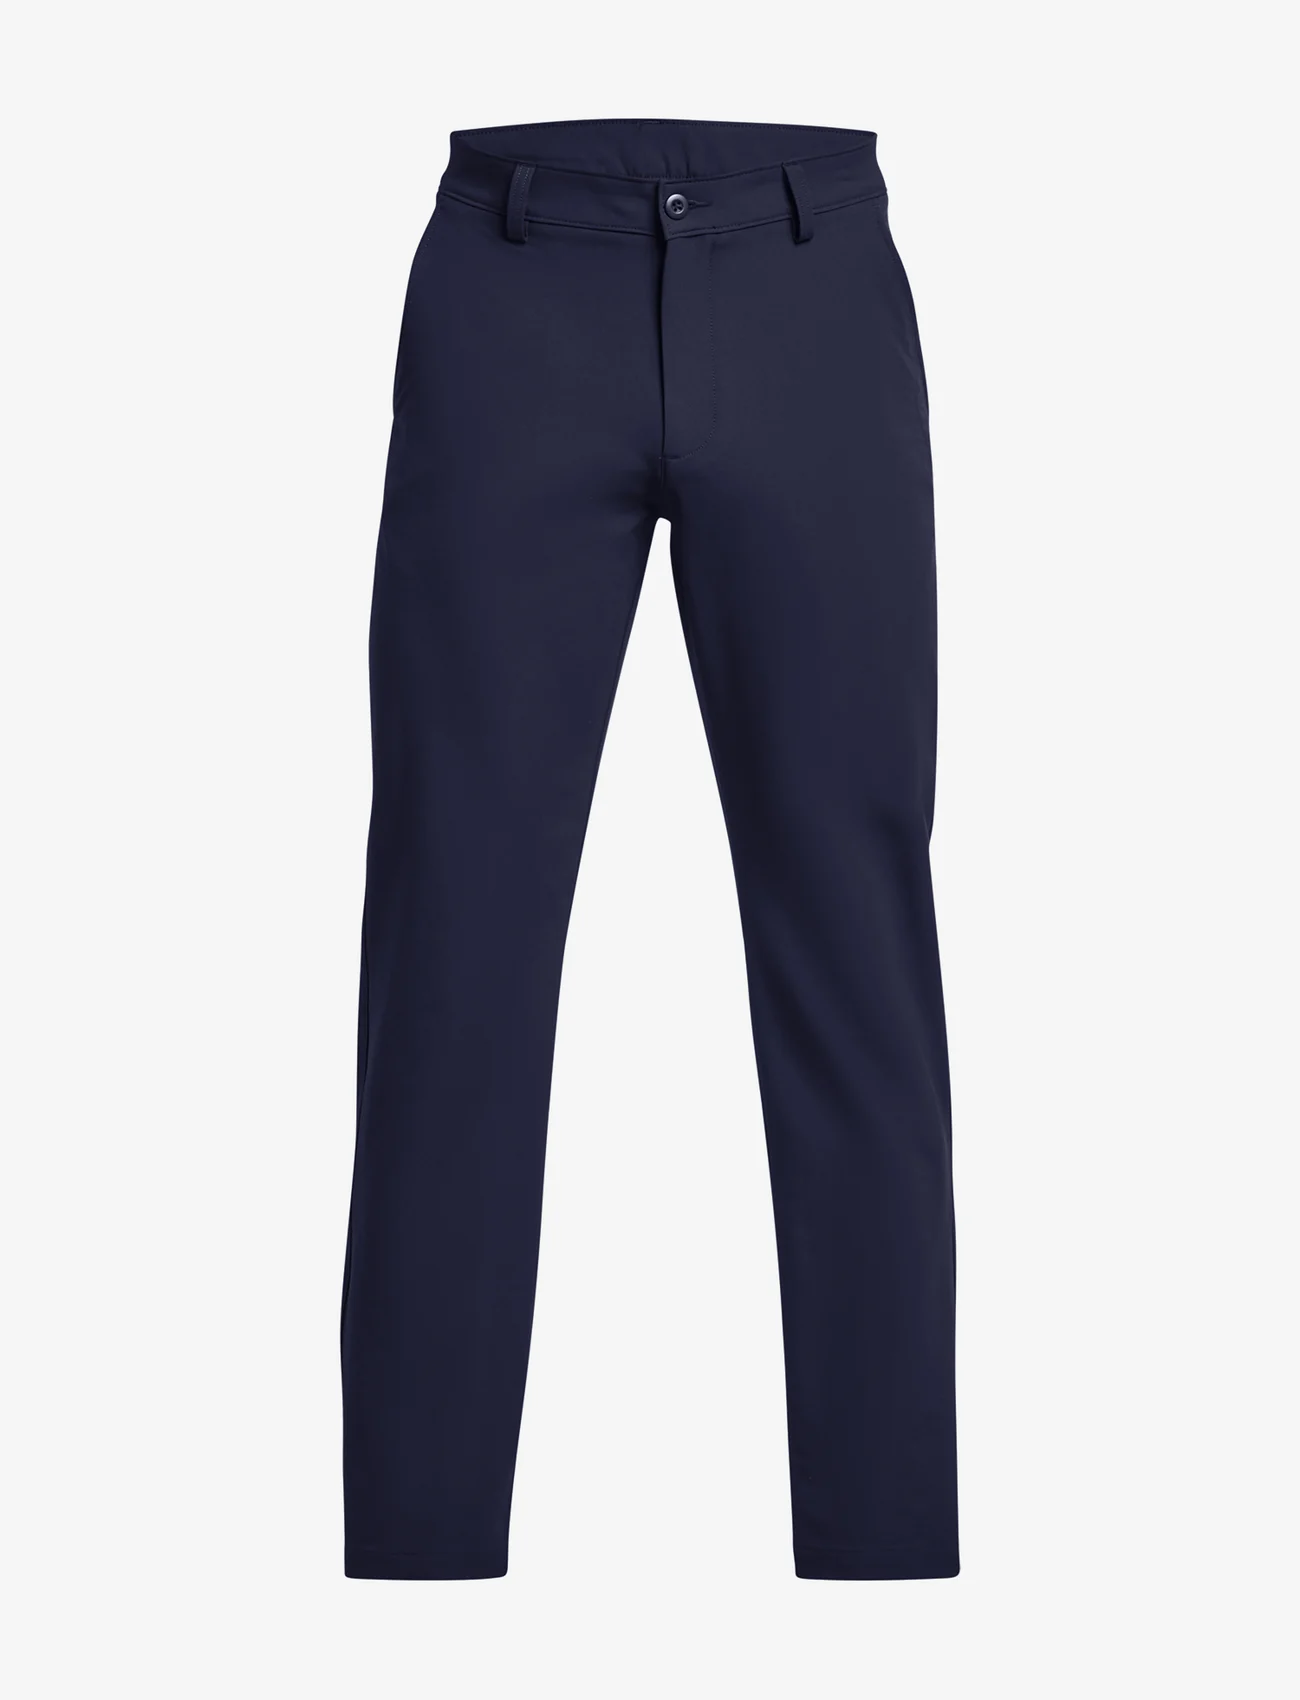 Under Armour - UA Tech Tapered Pant - golfbukser - midnight navy - 0